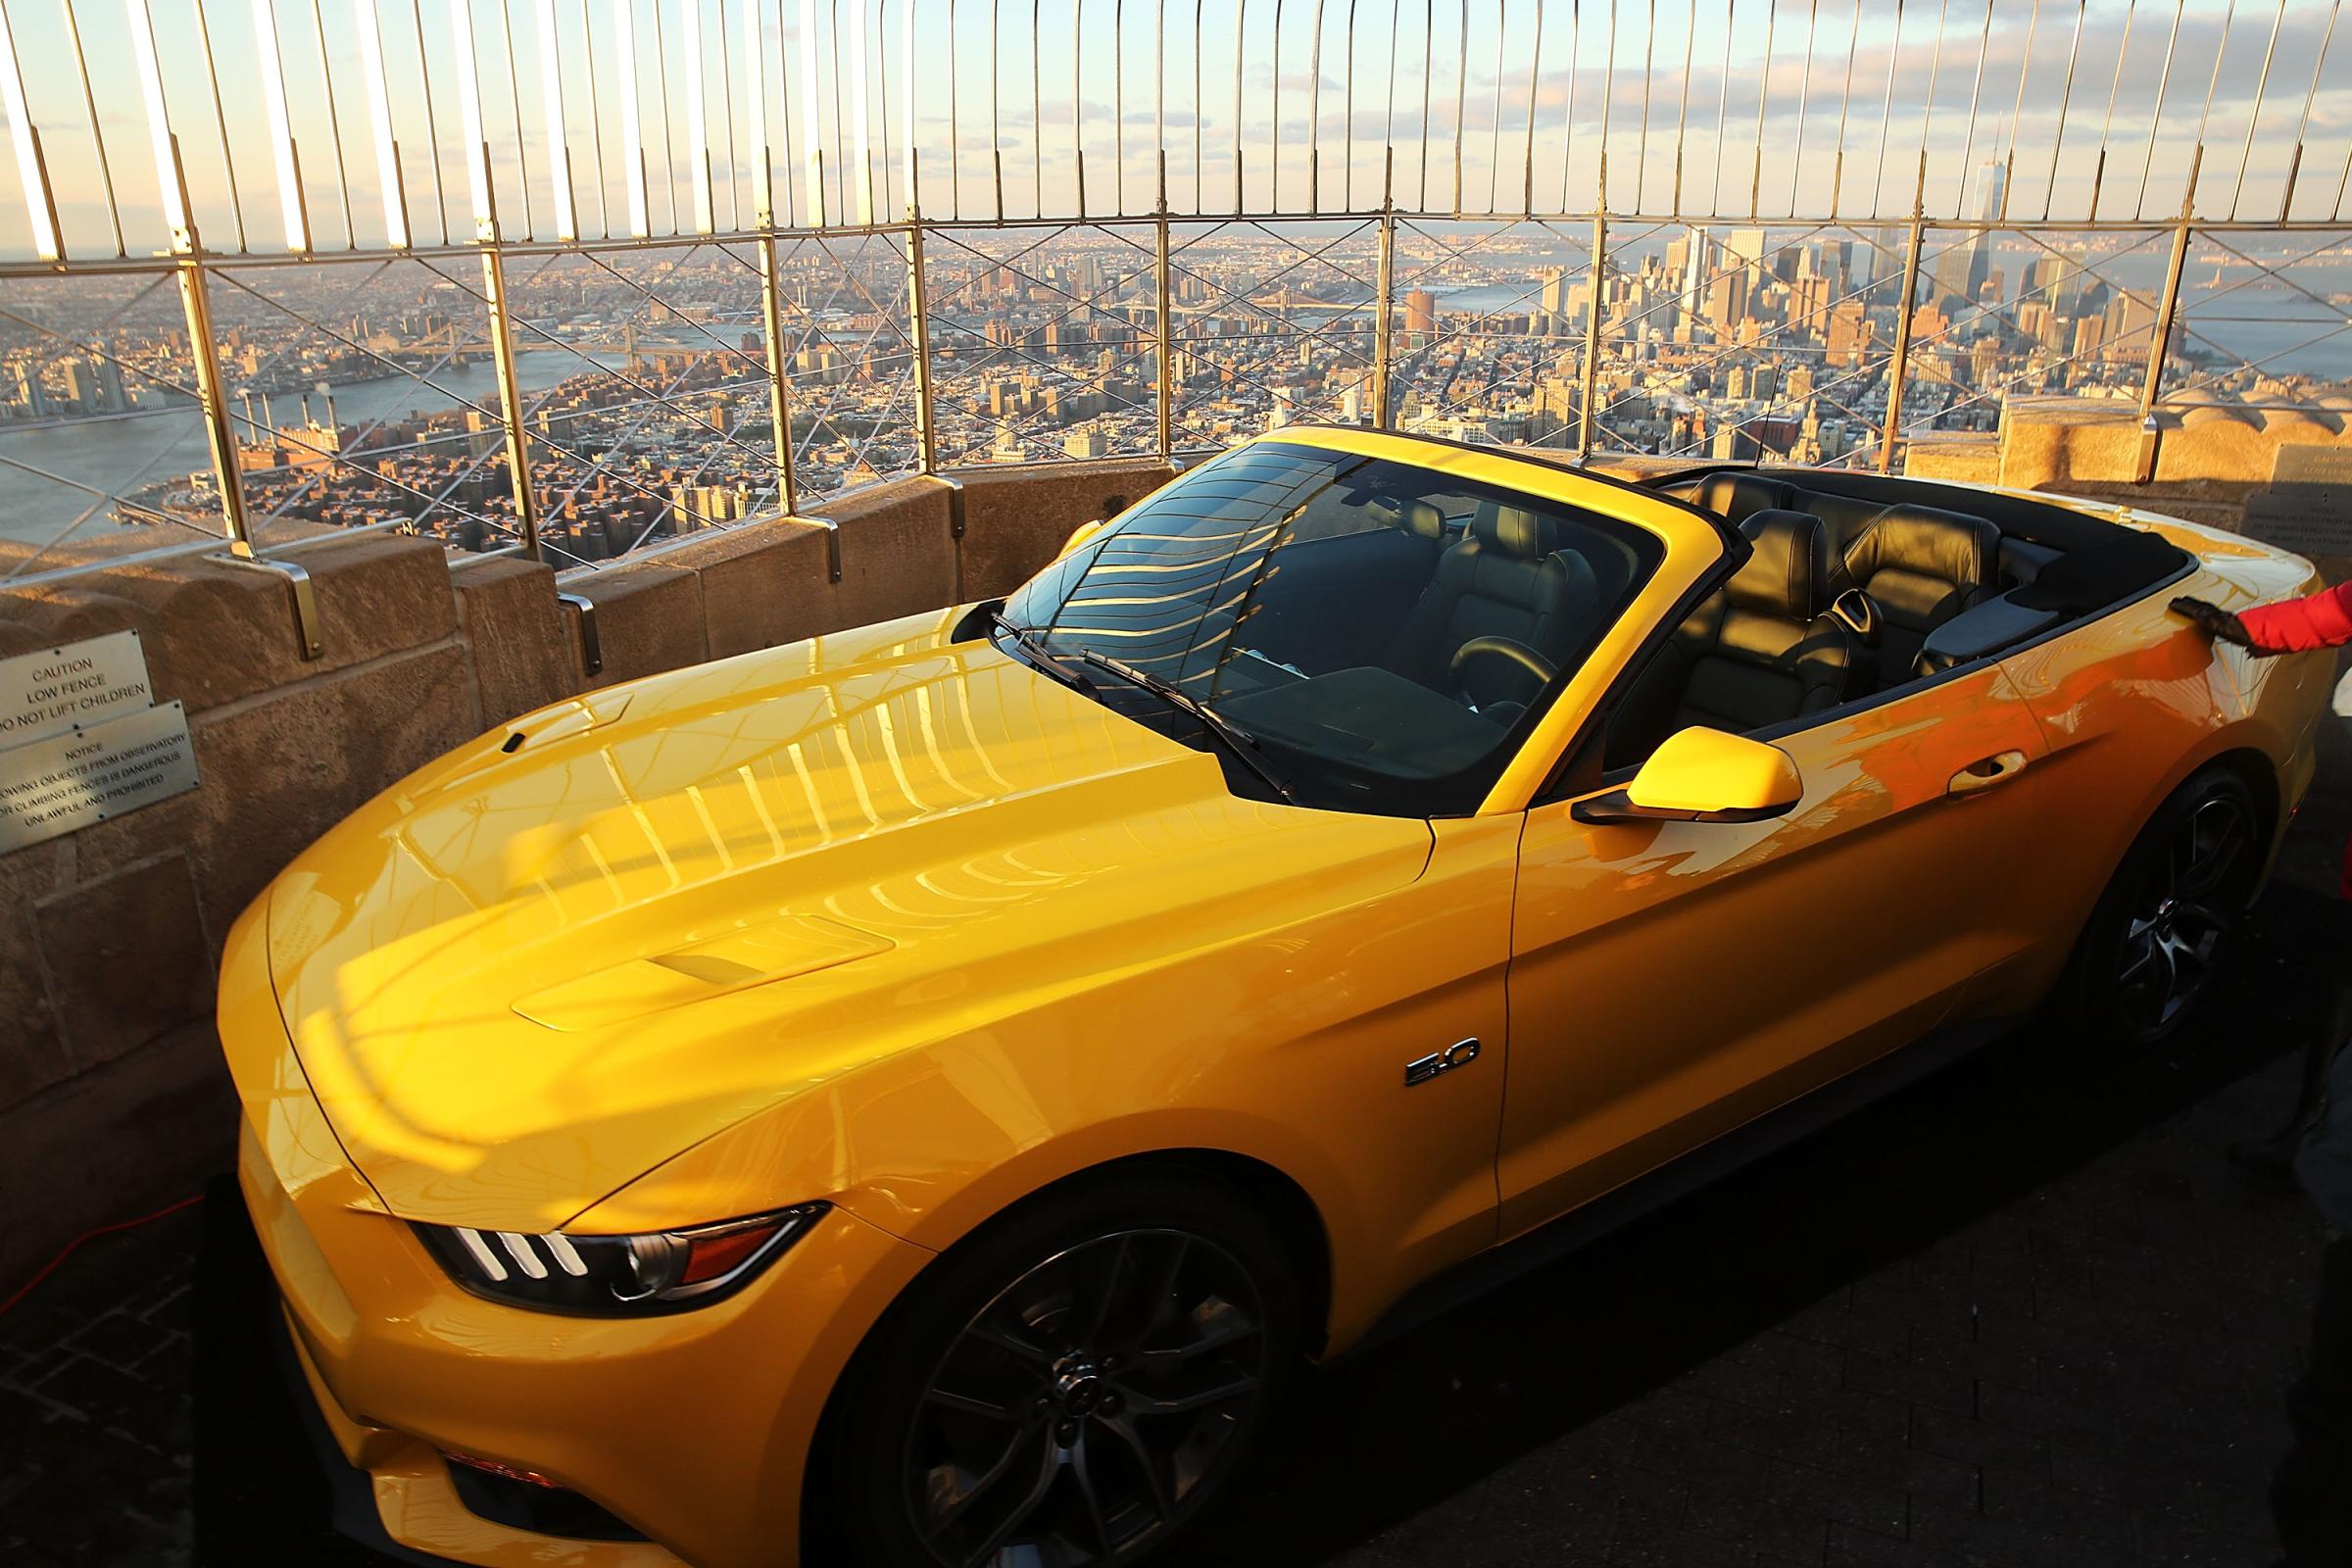 Ford Marks 50th Anniversary Of Company's Mustang By Revealing 2015 Model On Empire State Building